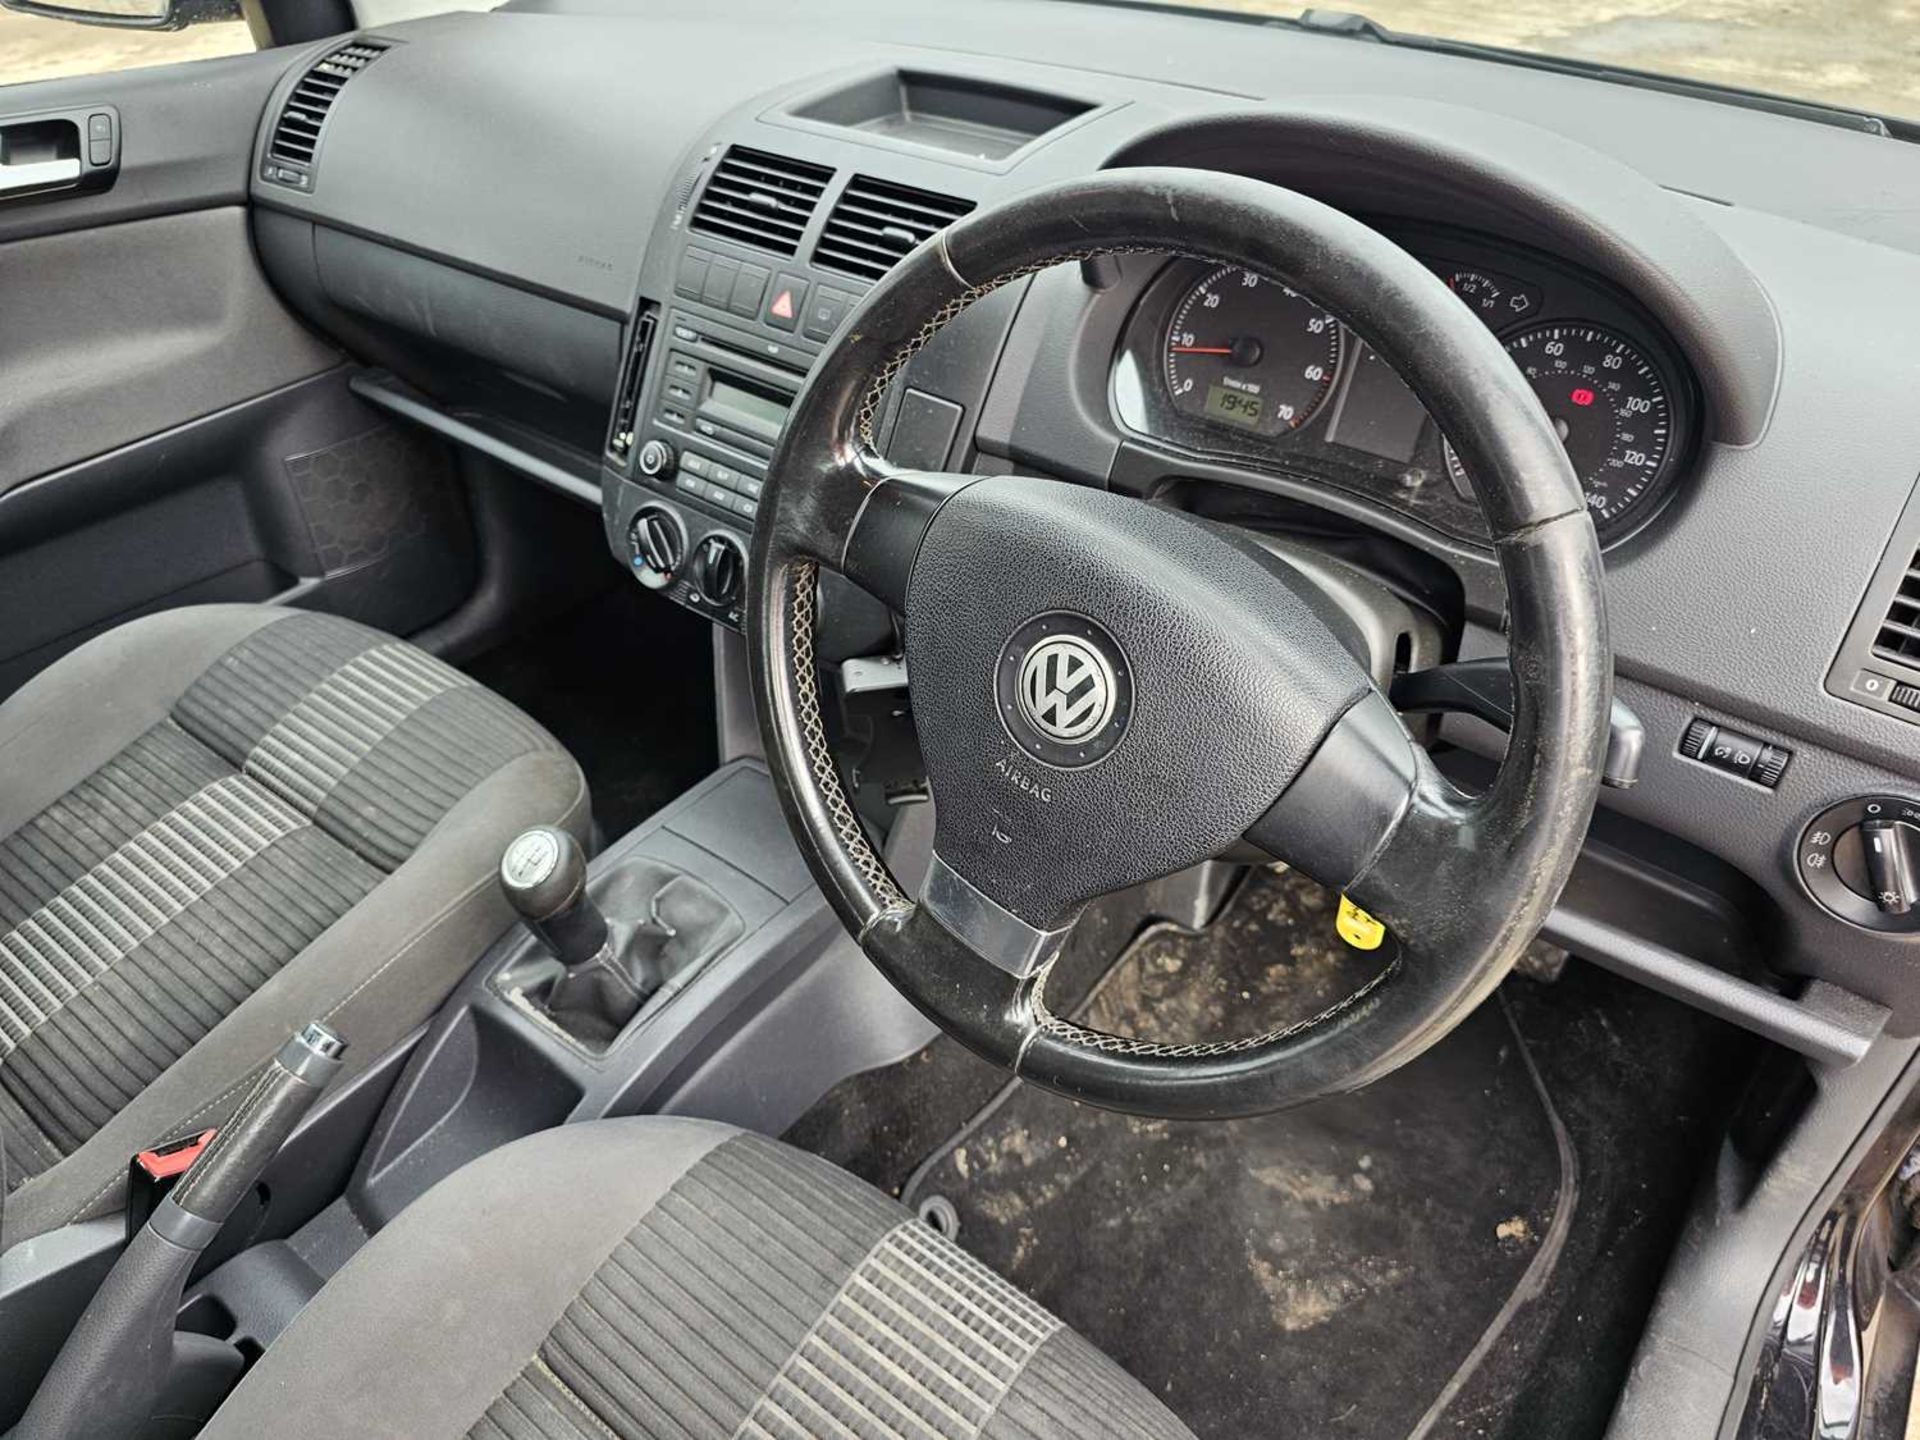 2008 Volkswagen Polo, 5 Speed, A/C (Reg. Docs. Available, Tested 05/24) - Image 15 of 28